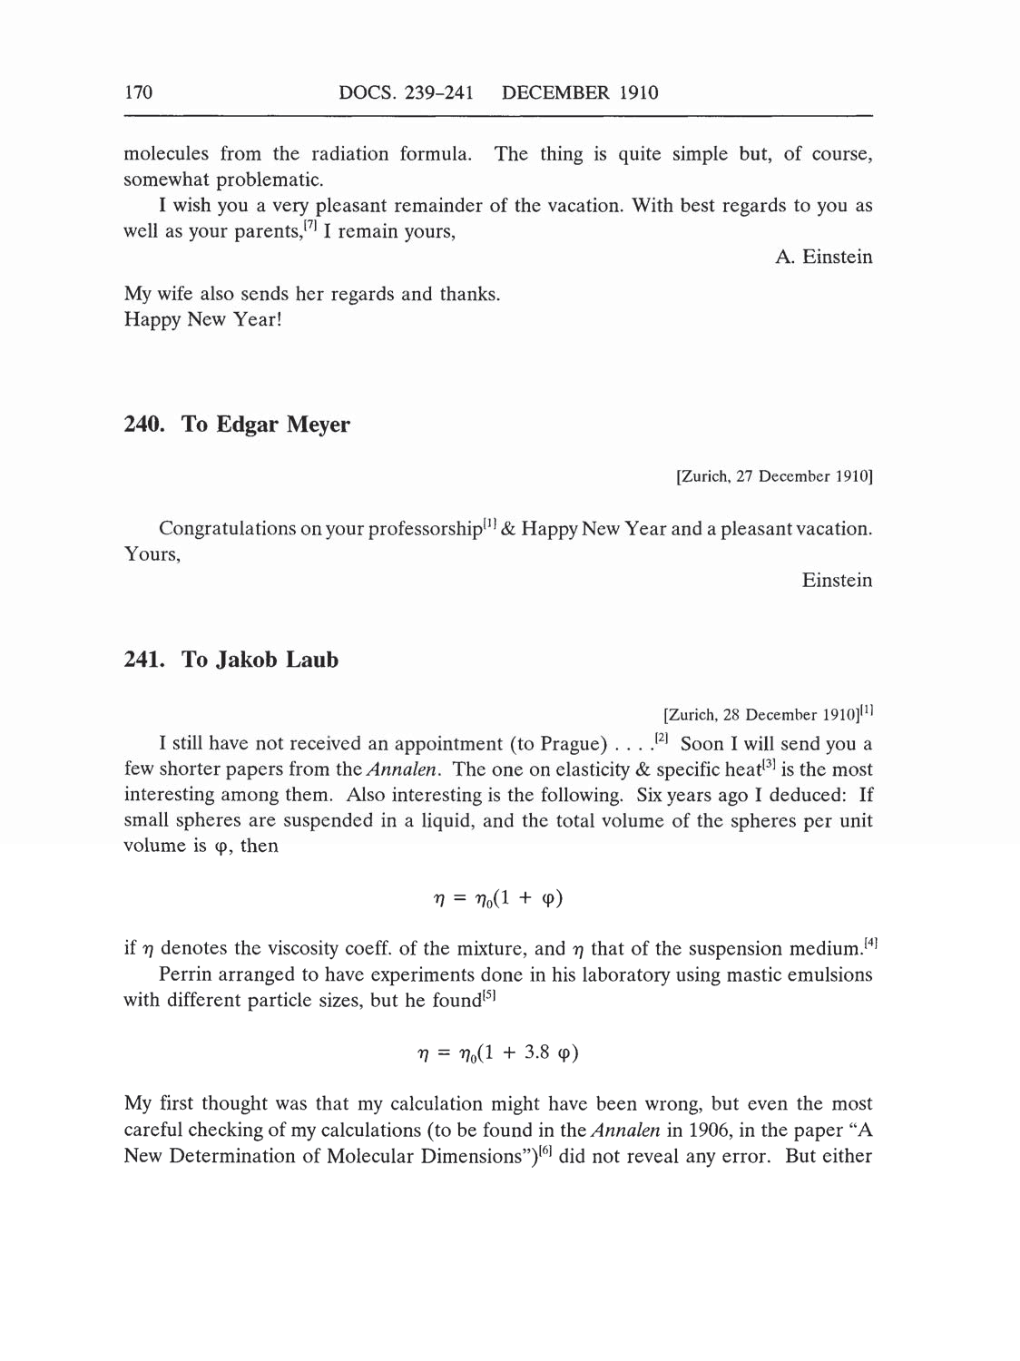 Volume 5: The Swiss Years: Correspondence, 1902-1914 (English translation supplement) page 170